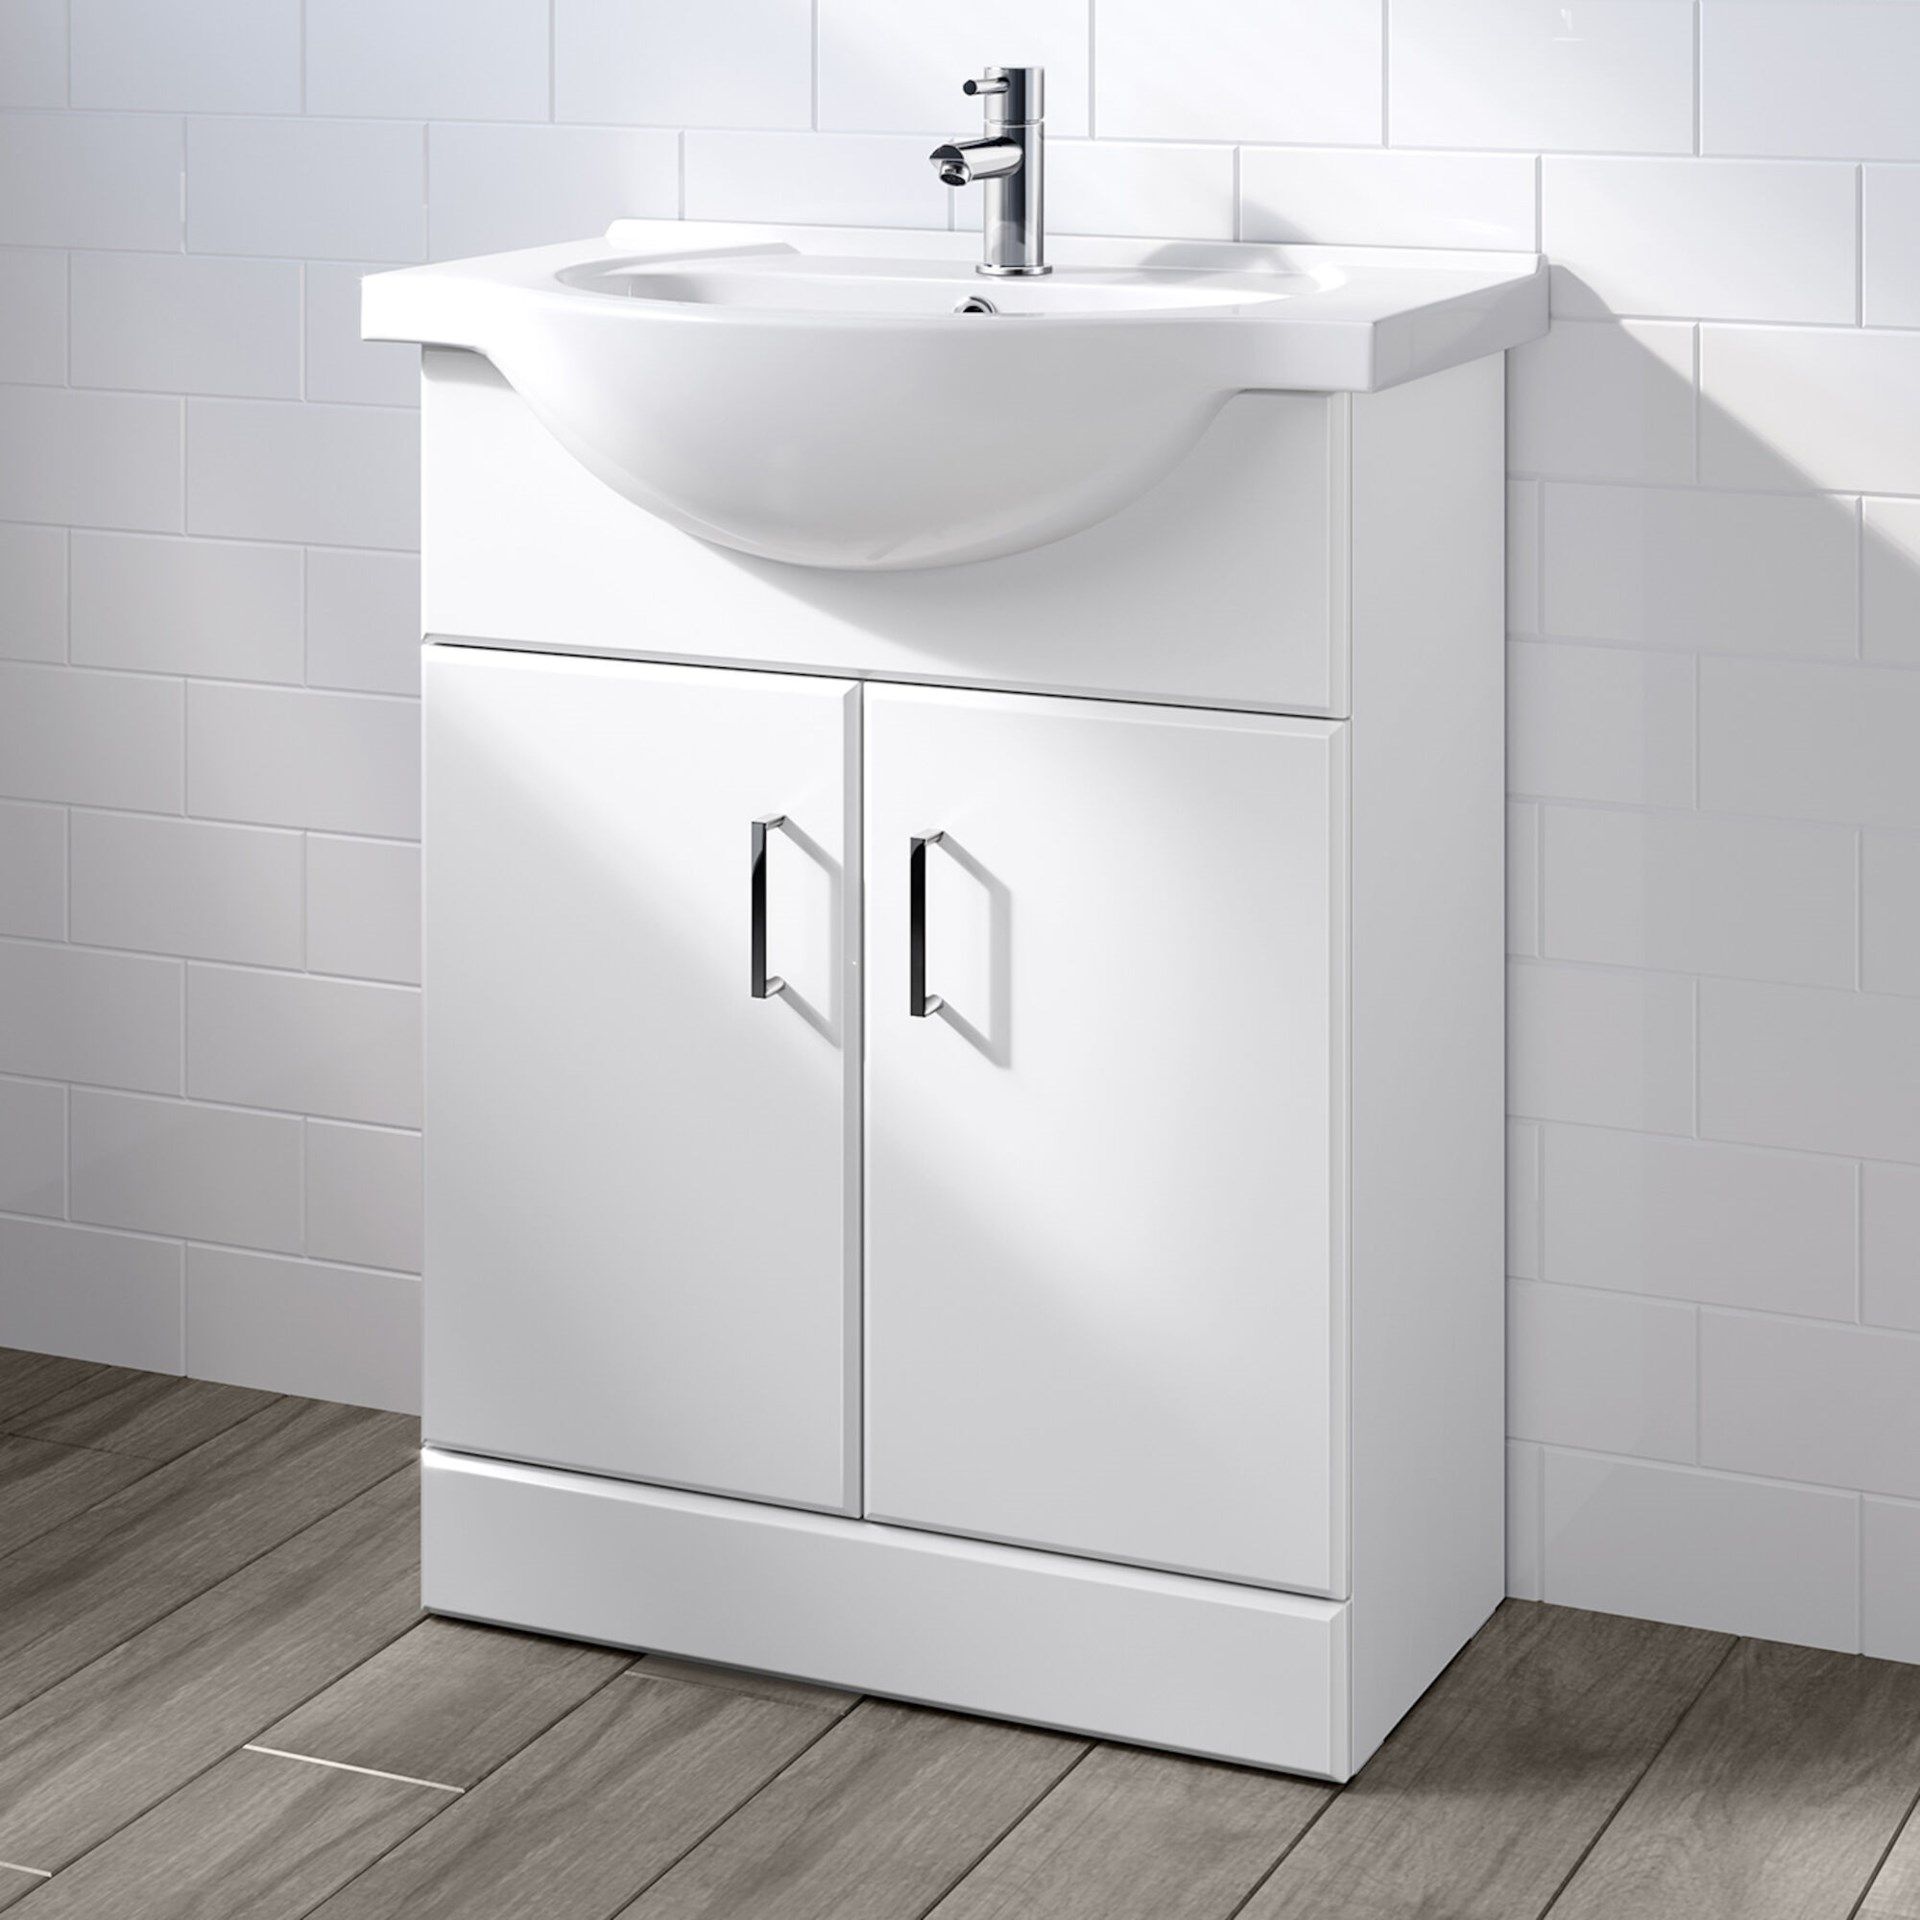 (TT150) 550mm Quartz Gloss White Built In Basin Cabinet. RRP £349.99. Comes complete with basi... - Image 4 of 4